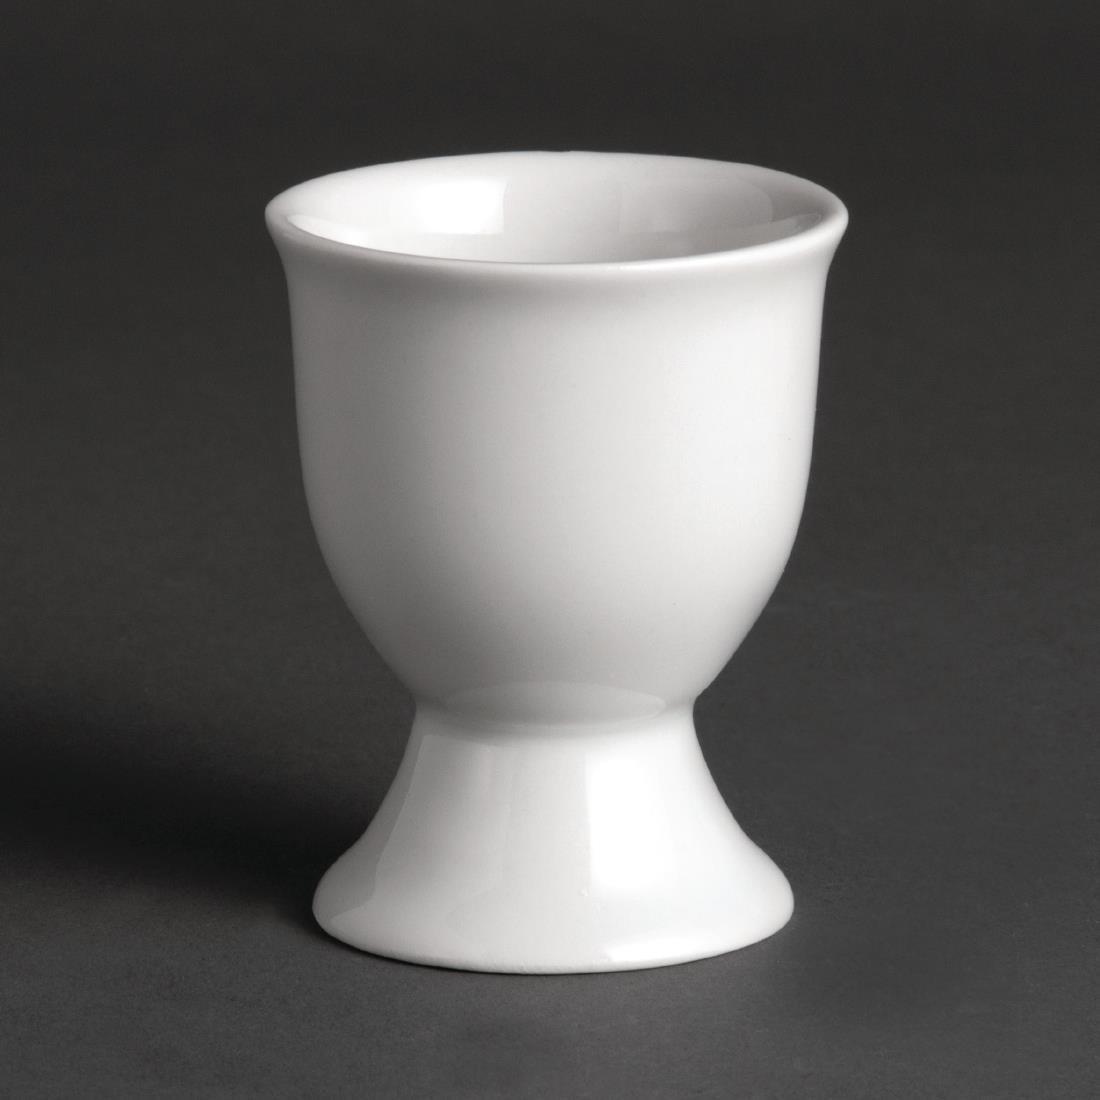 Olympia Whiteware Egg Cups 68mm (Pack of 12) - U814  - 1